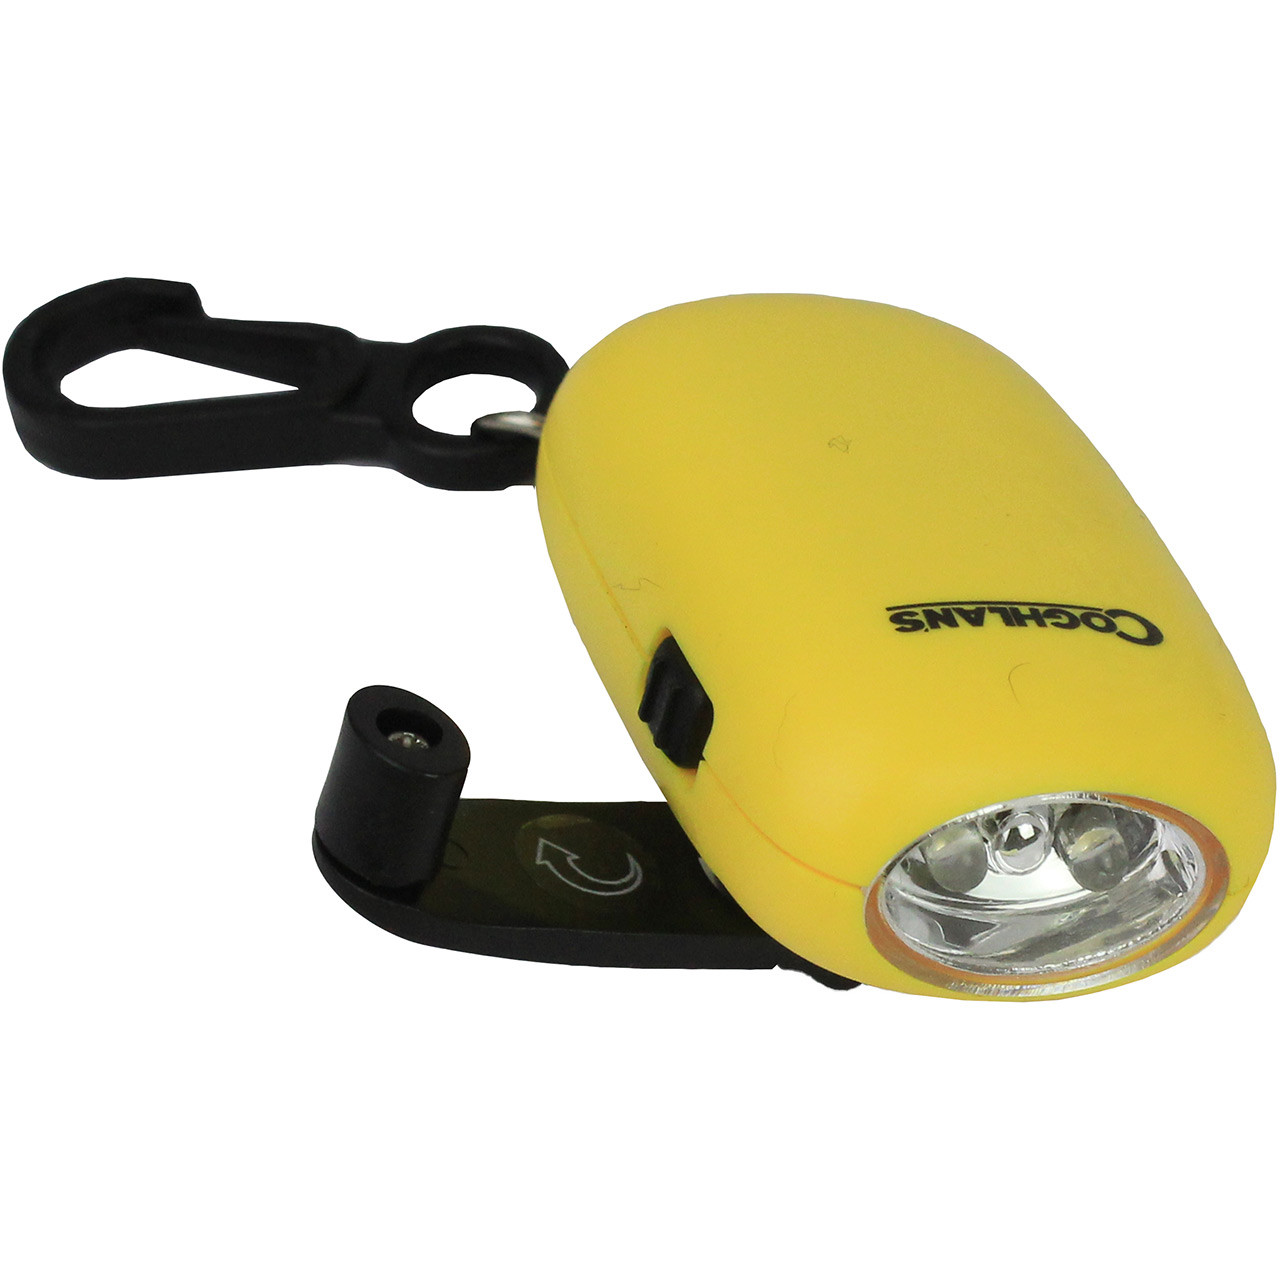 The Best Hand-Crank Flashlight Options for Light in Emergency